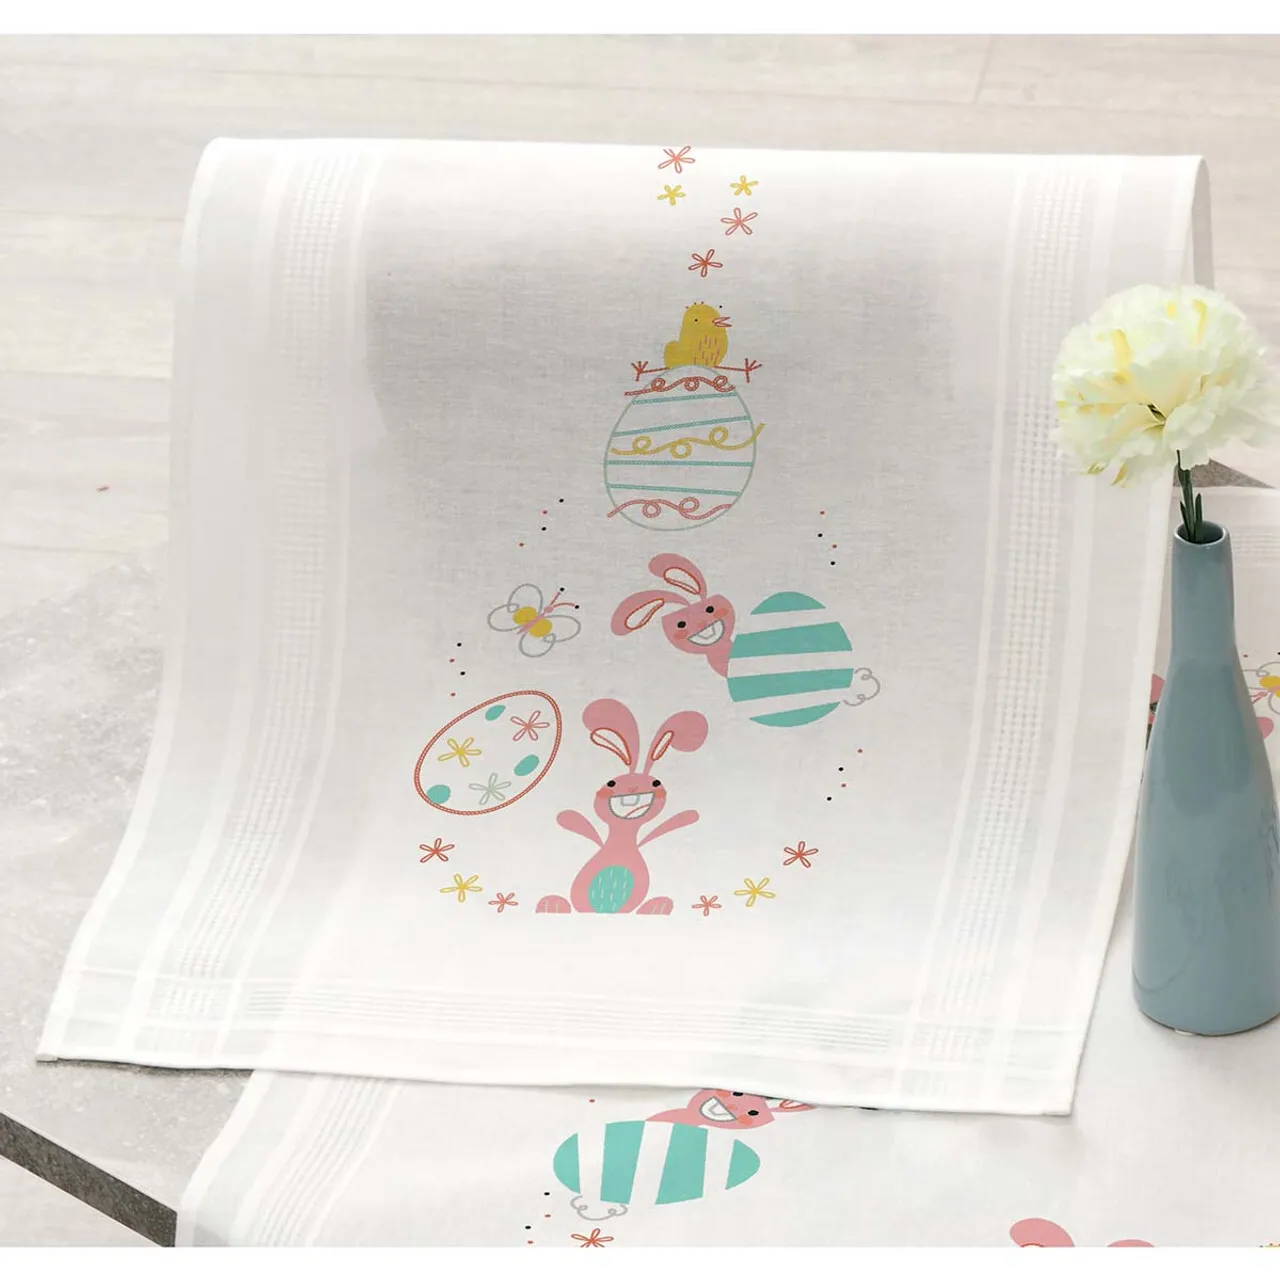 Craftways Bunny & Eggs Table Runner Stamped Embroidery Kit